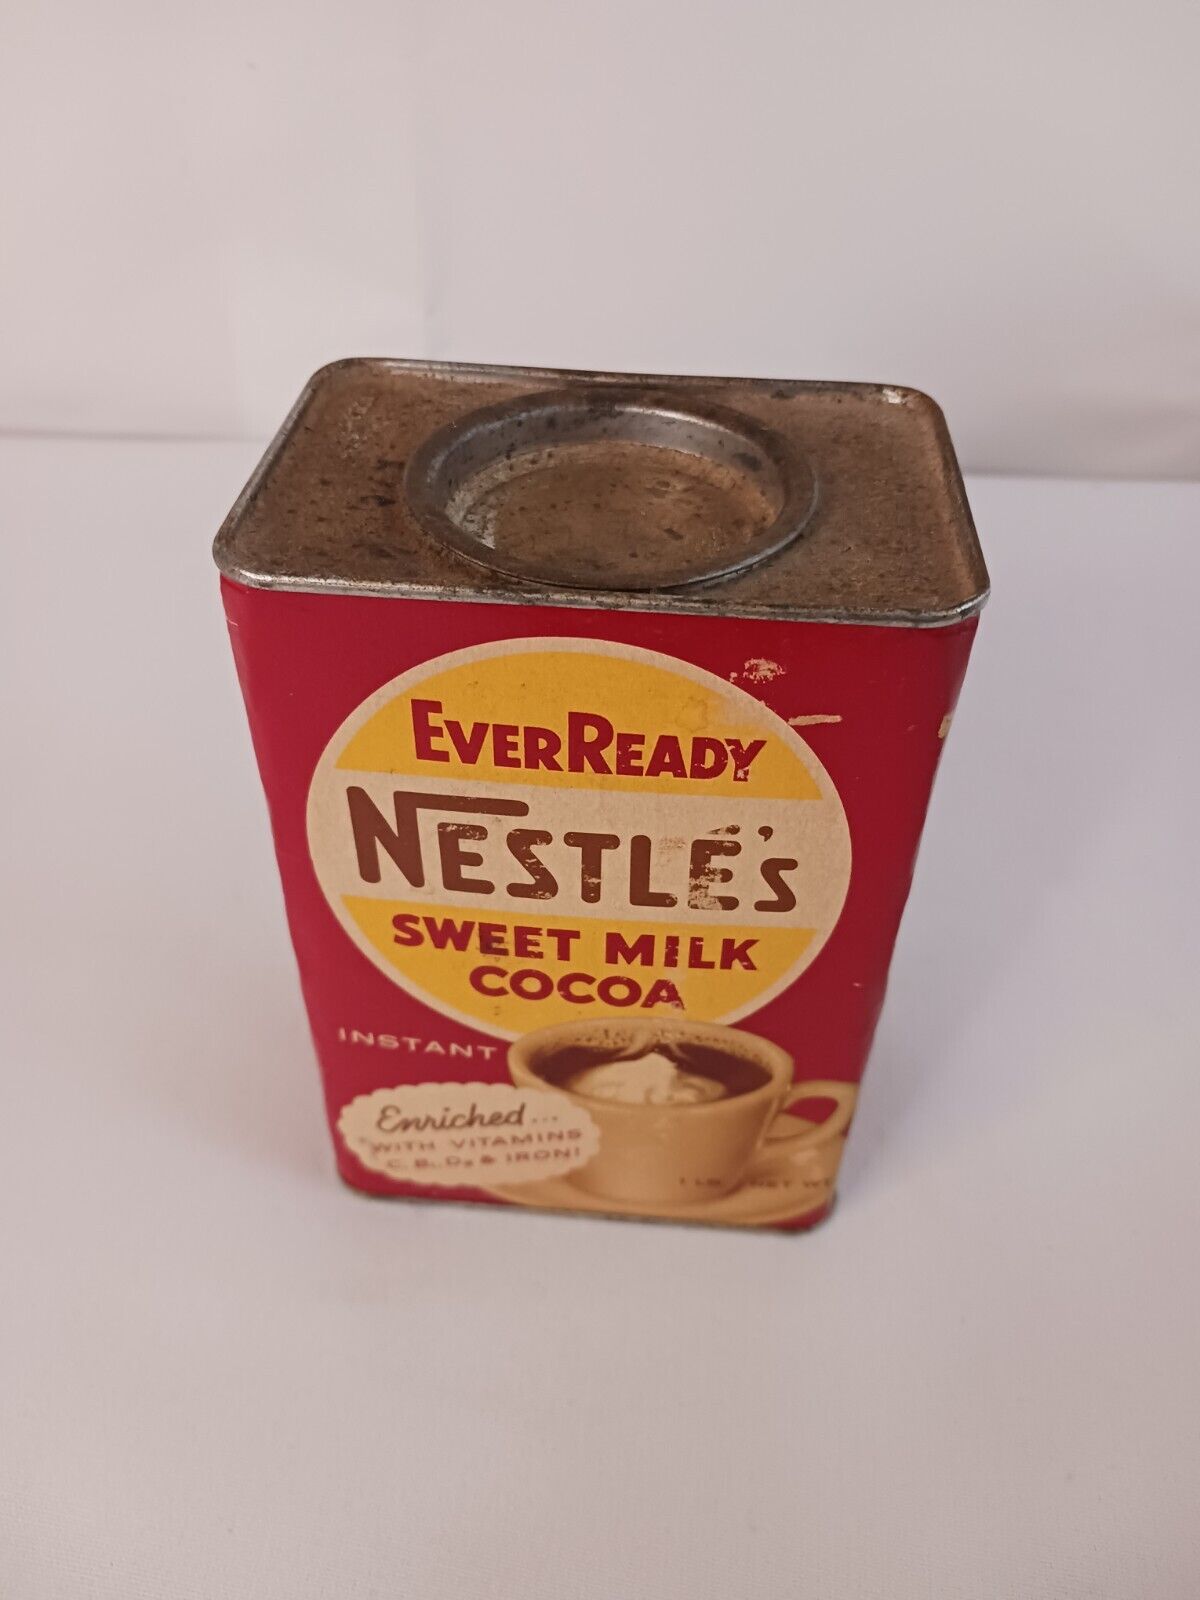 Vintage Nestle's Ever Ready Sweet Milk Cocoa 1 lb. Container 